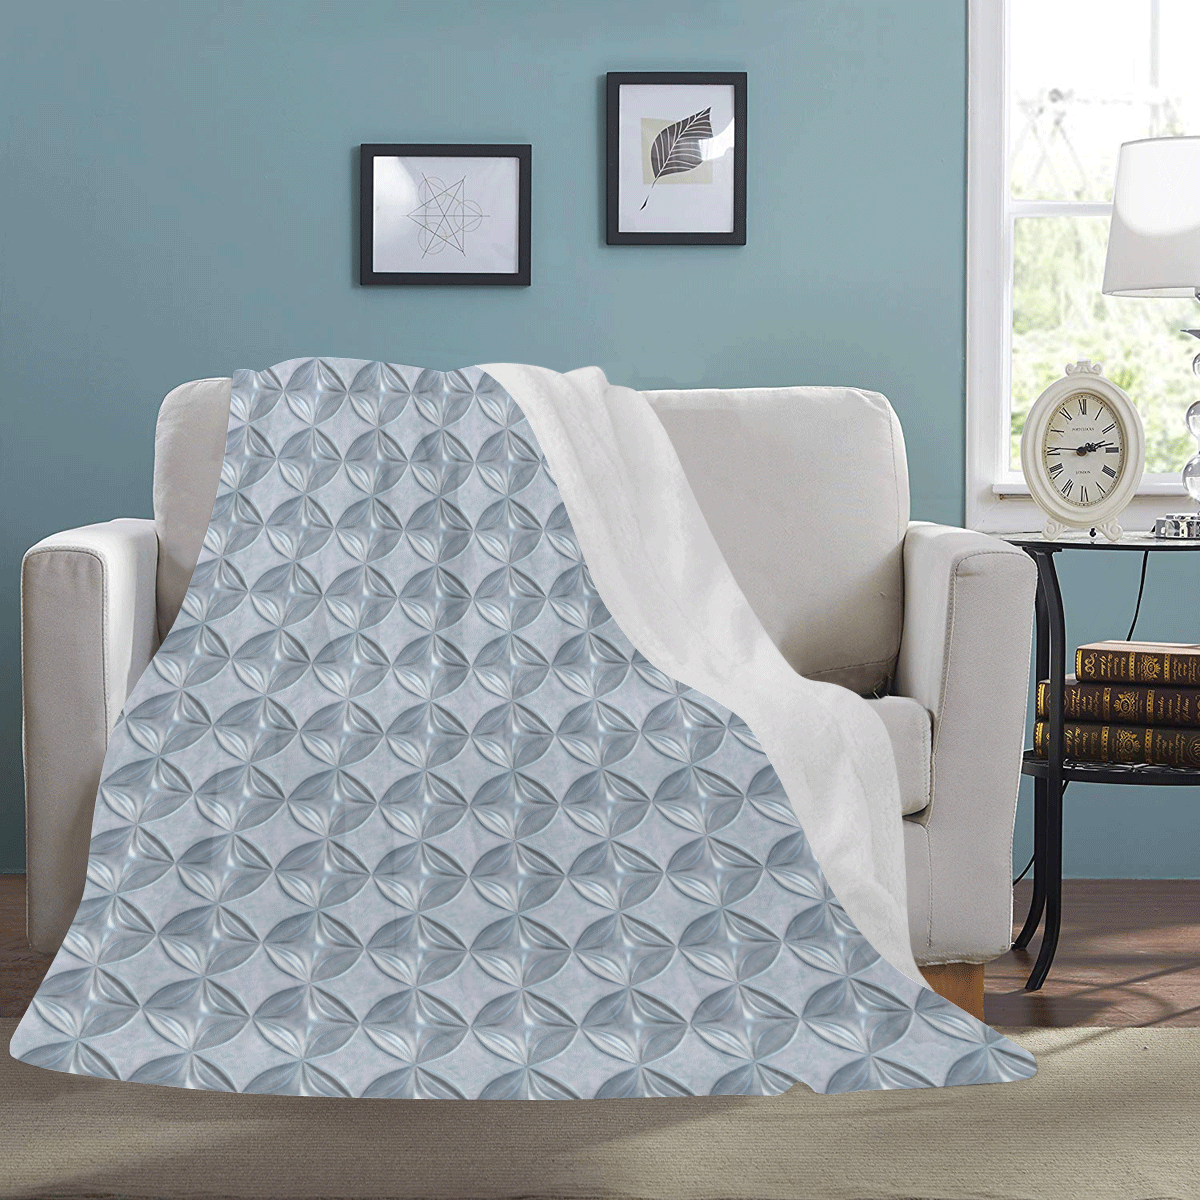 Glass pattern on a marble background Ultra-Soft Micro Fleece Blanket 54''x70''